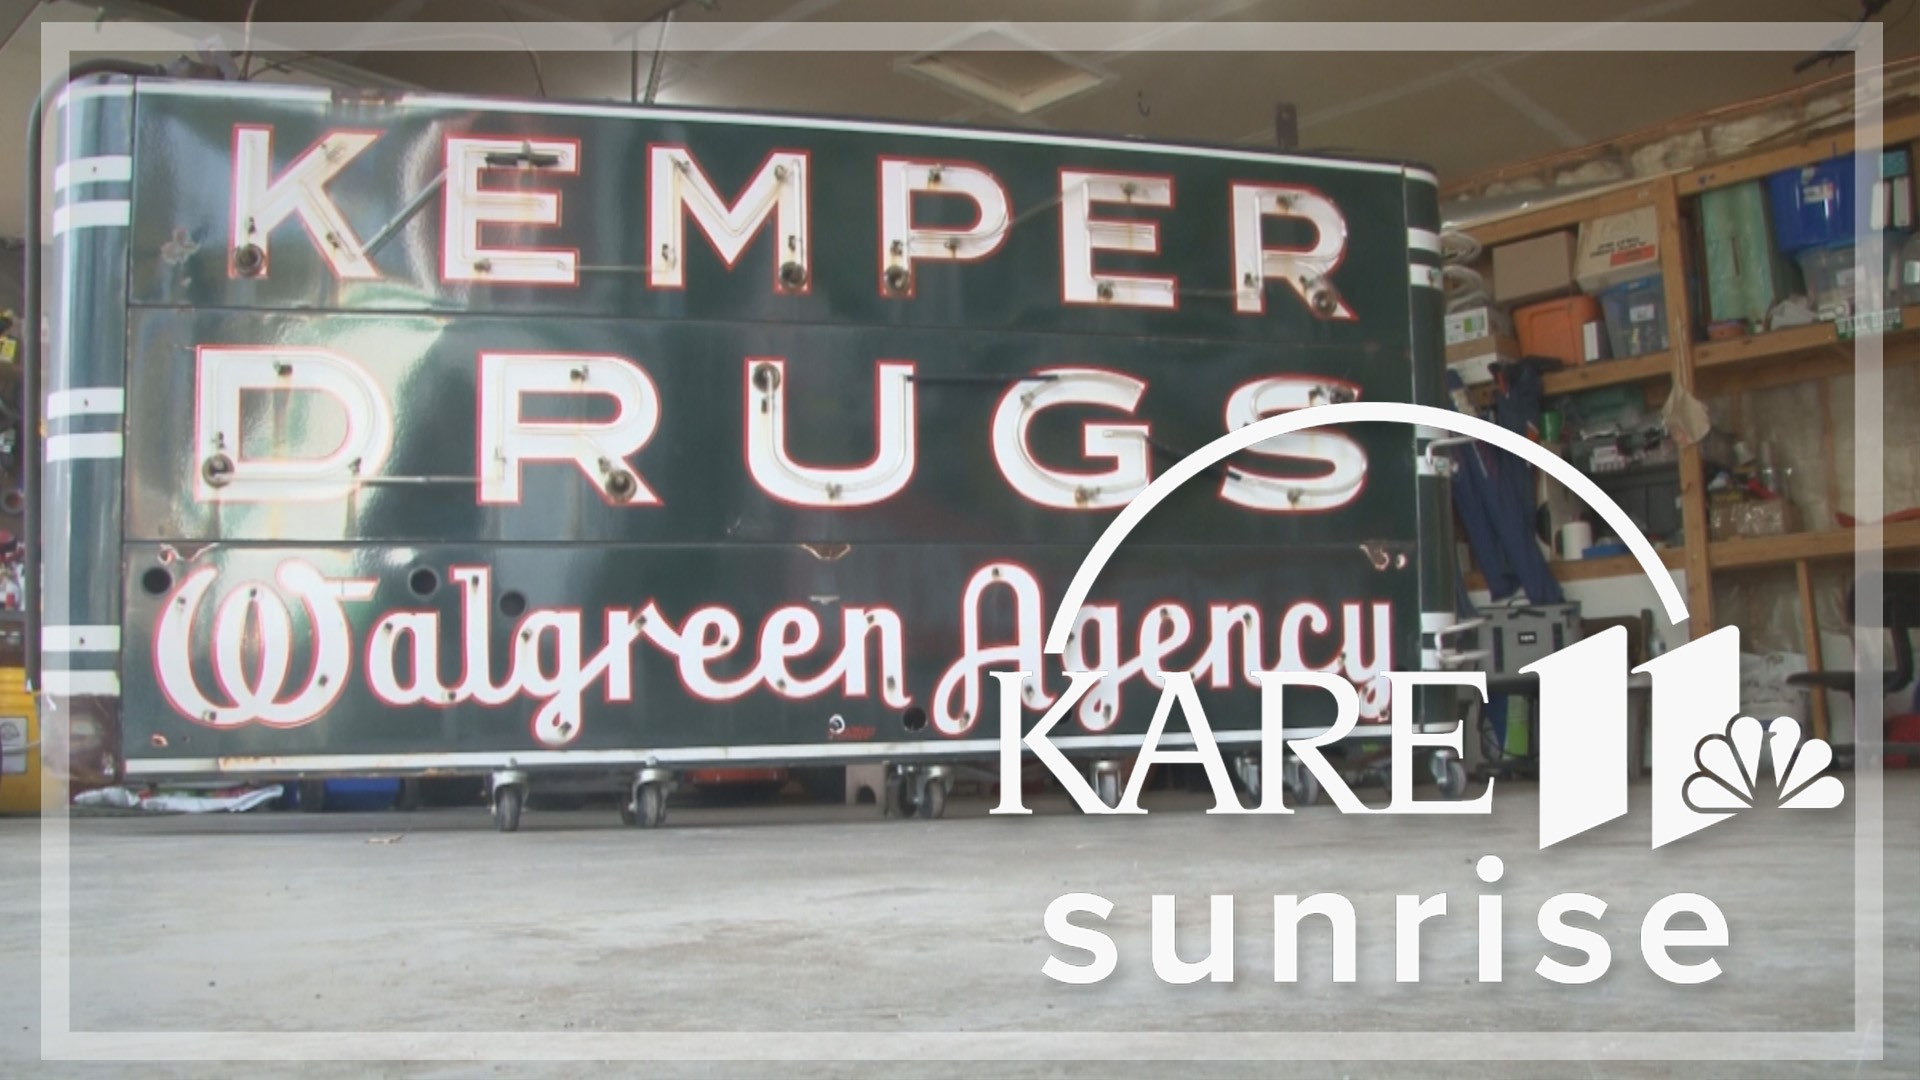 Kemper Drug & Gifts had been in Elk River for more than 100 years before shutting its doors back in March.